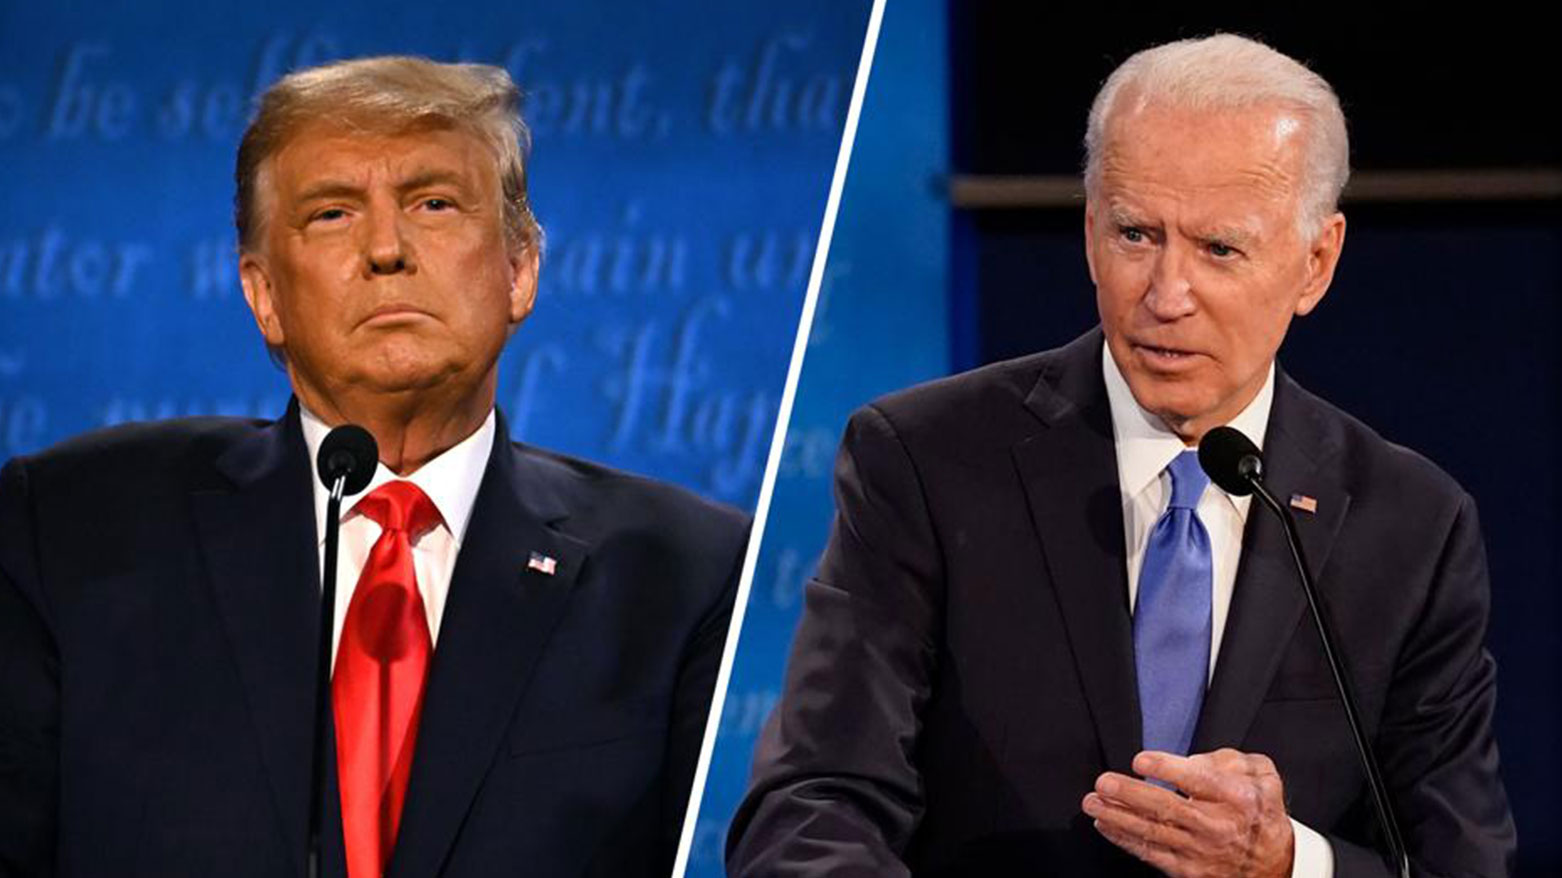 New poll shows Biden lagging behind Trump in presidential race